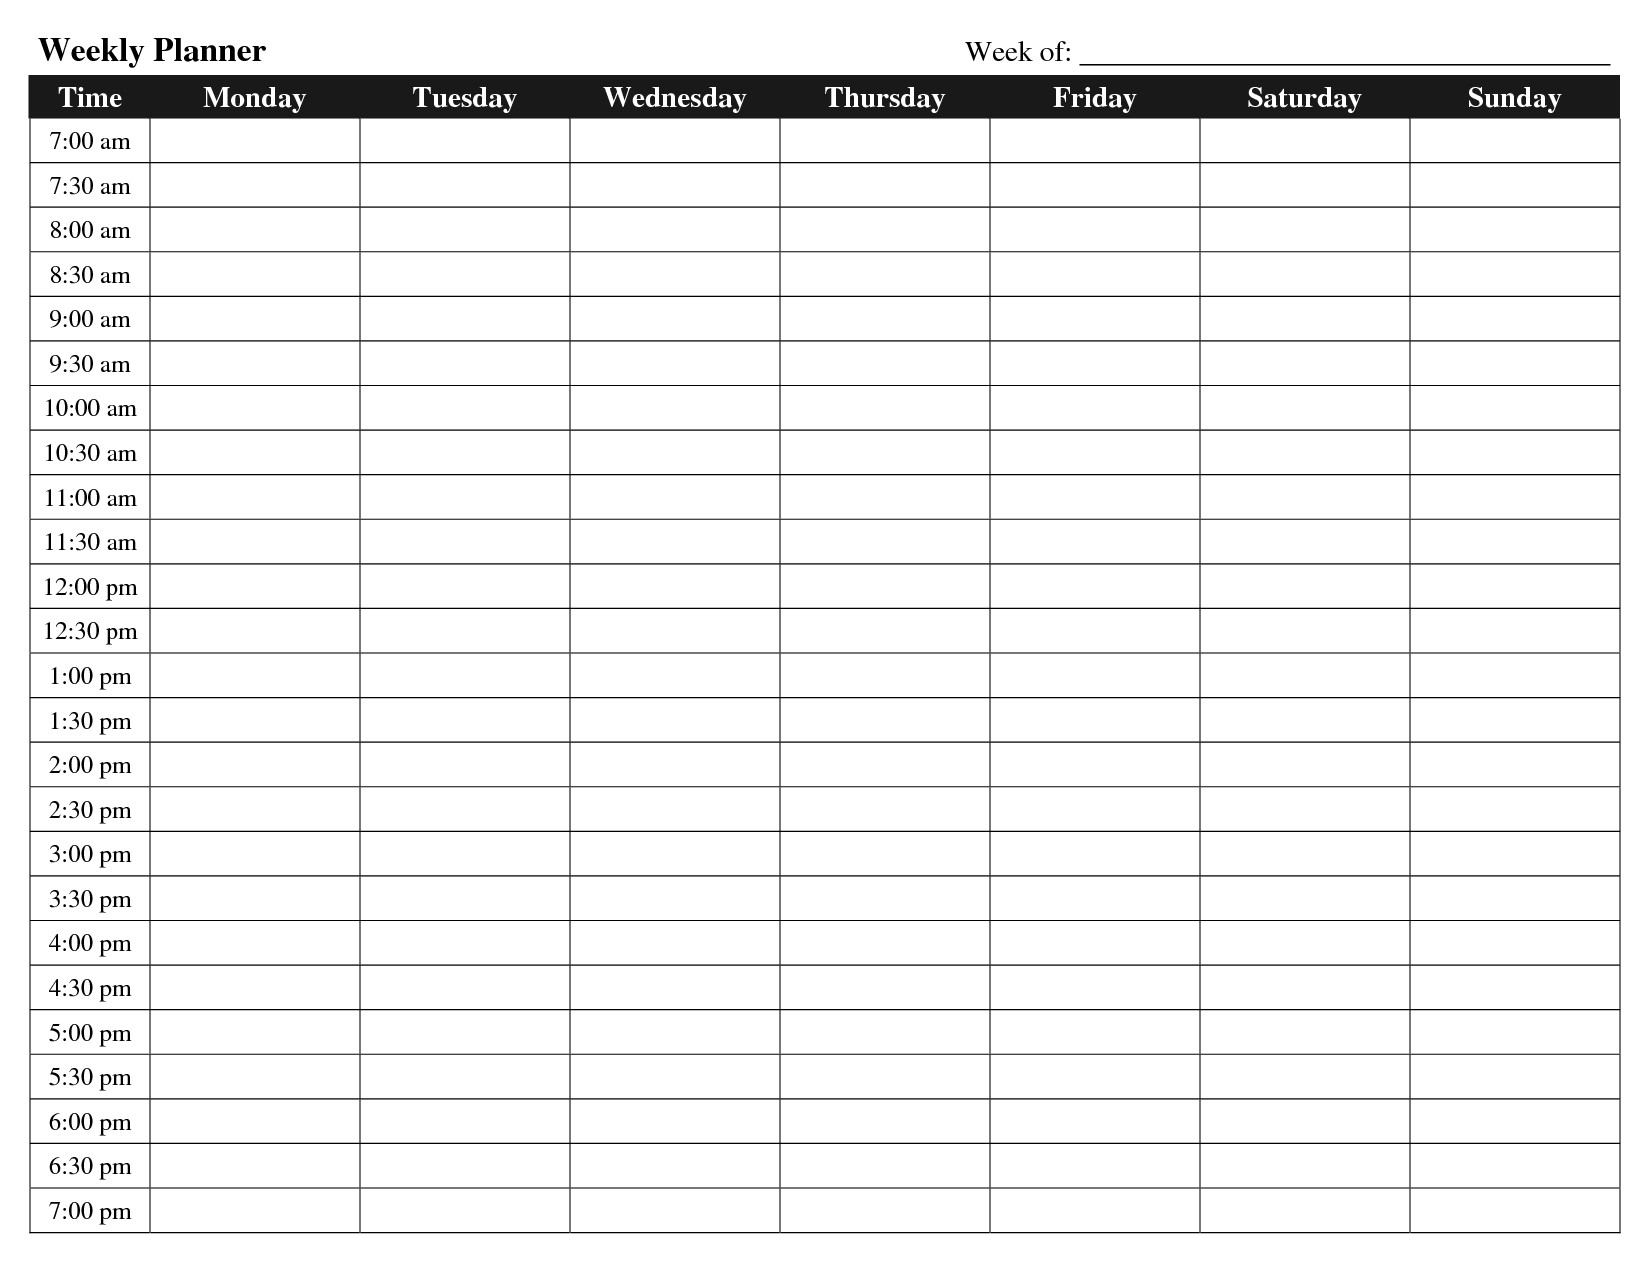 Day Ndar Template Excel Blank Hourly Grid Templates Schedule | Smorad with regard to Blank 7-Day Calendar With Time